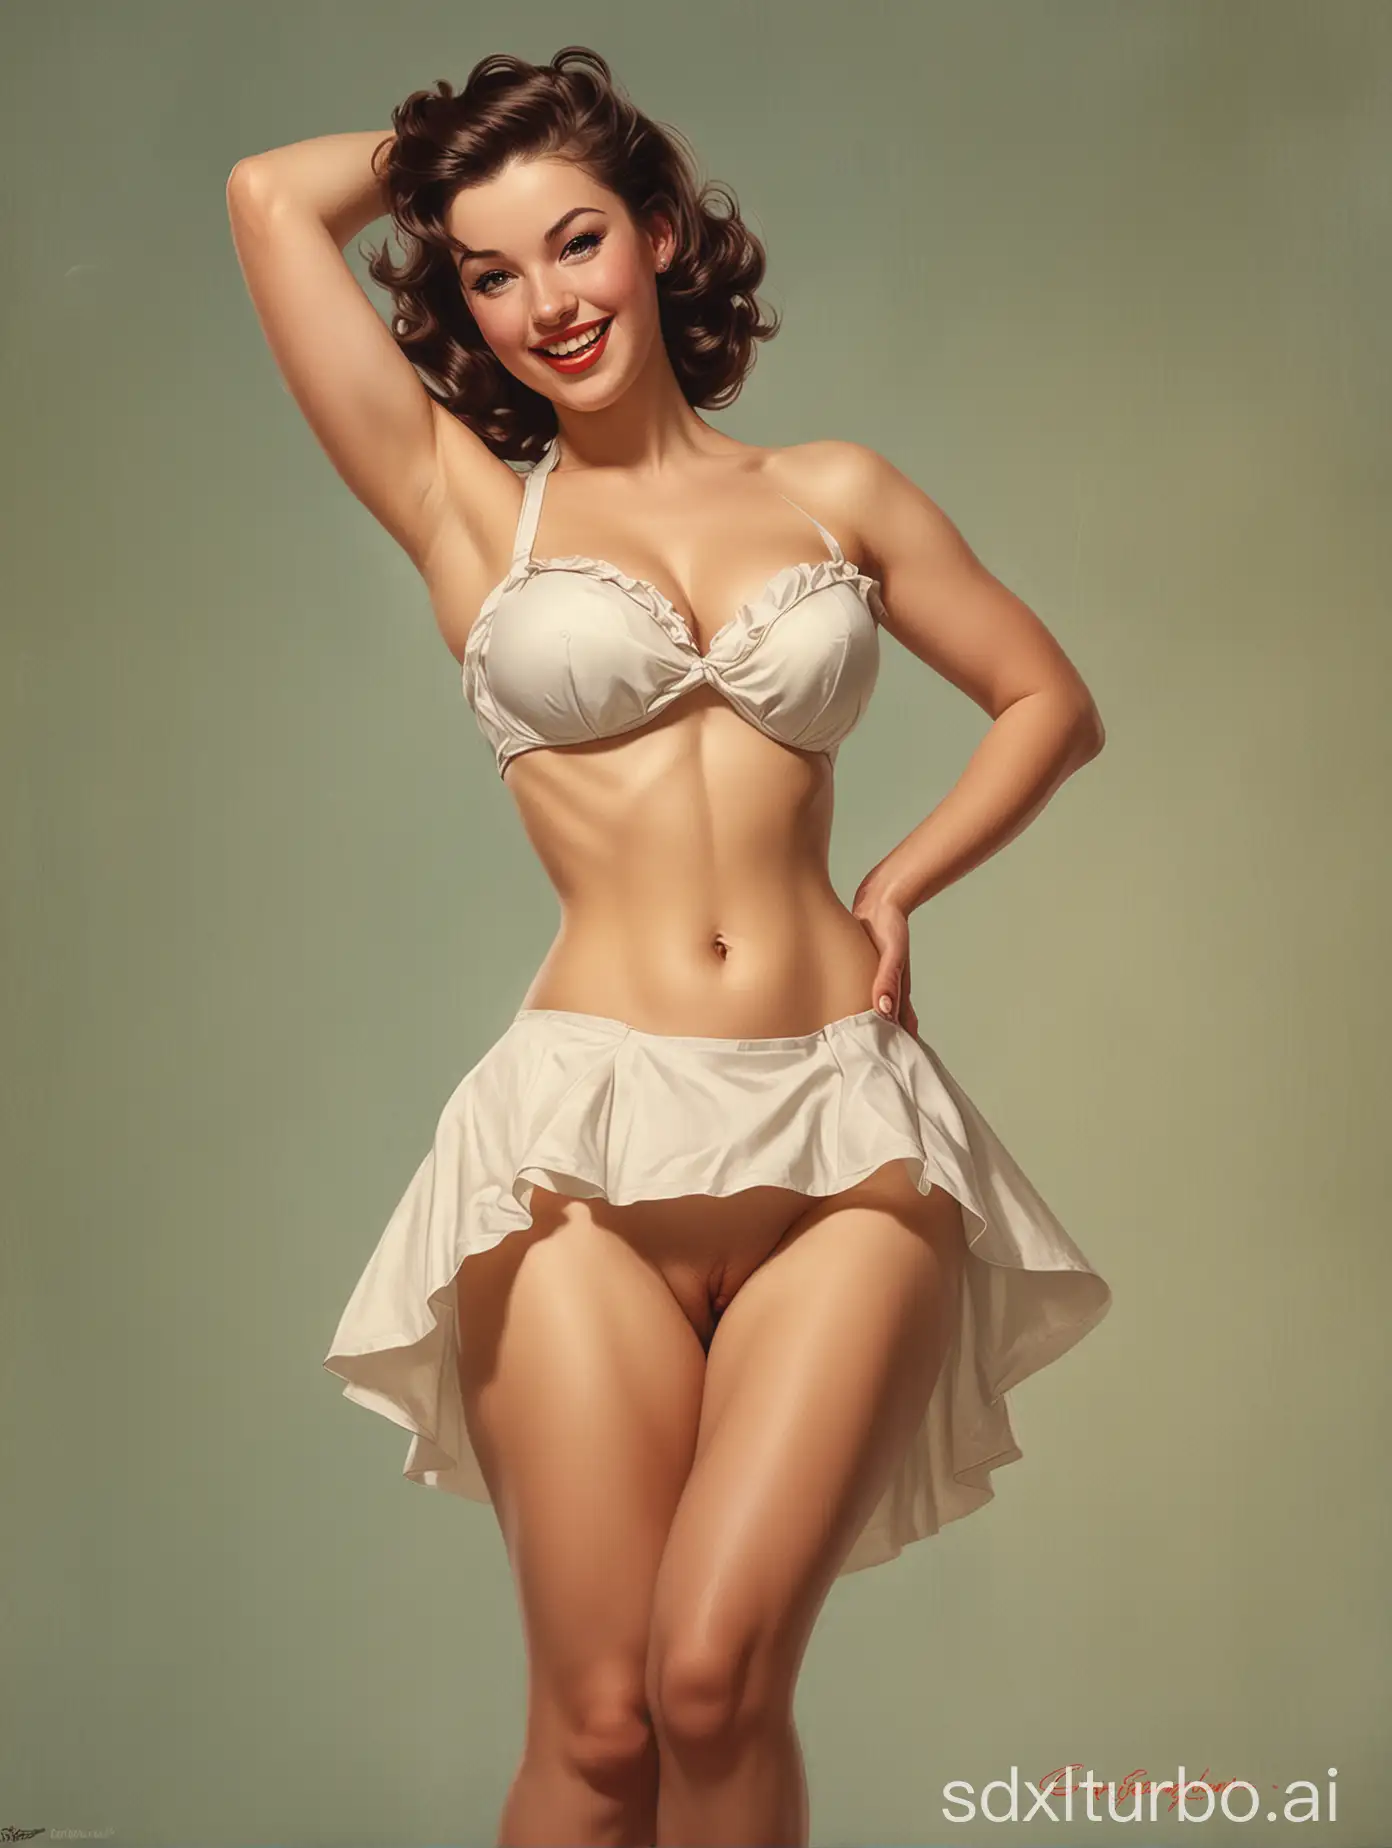 Seductive-Pinup-Art-Alluring-Woman-in-Classic-Gil-Elvgren-Style